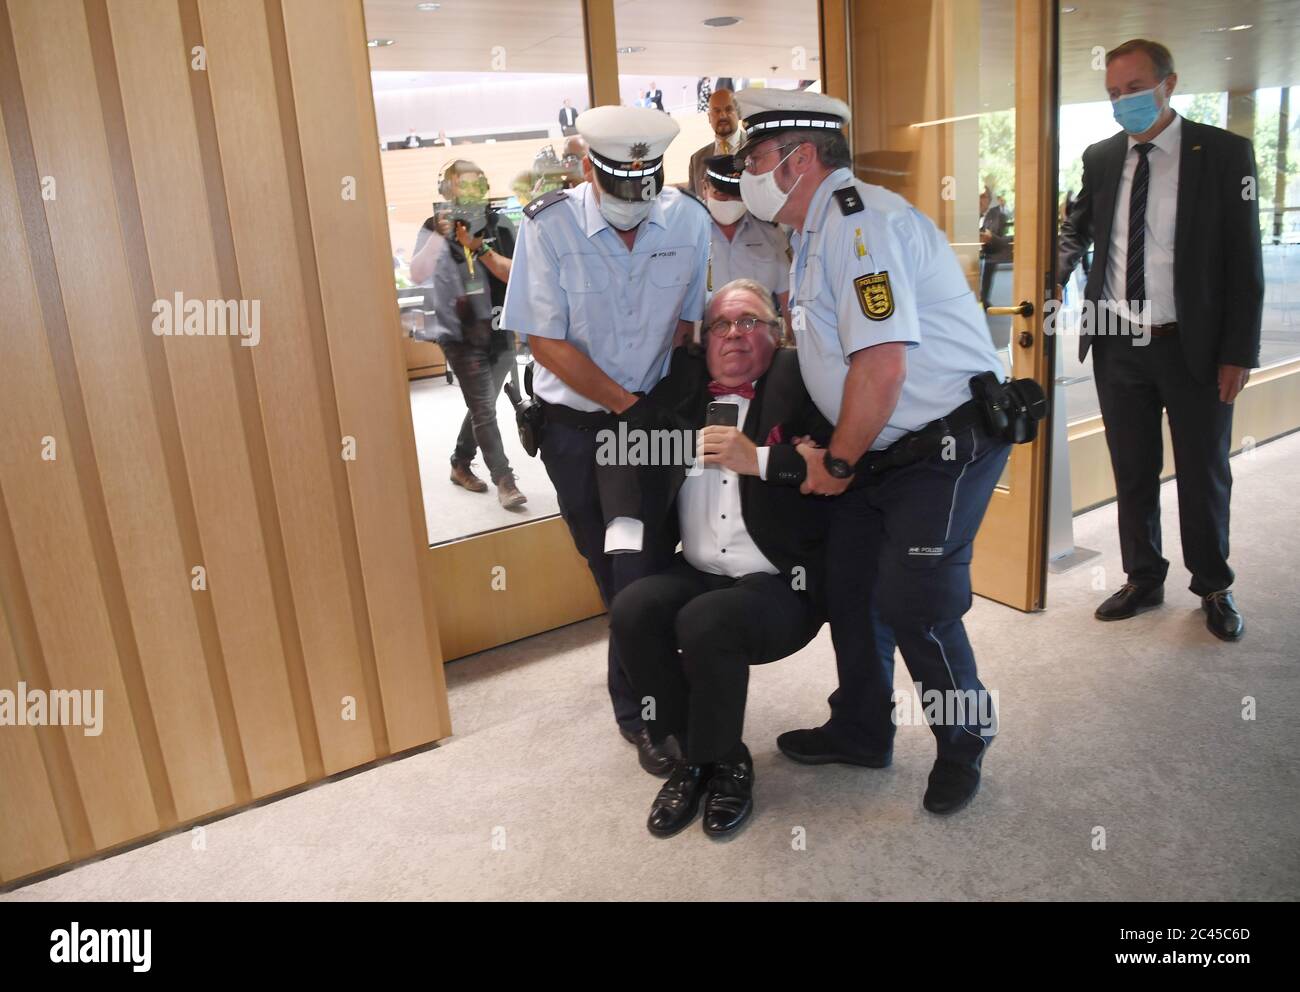 Stuttgart, Germany. 24th June, 2020. Heinrich Fiechtner (AfD, M) is  supported by police officers from the state parliament of Baden-Württemberg.  The MP was excluded from the session after a speech by Landtag